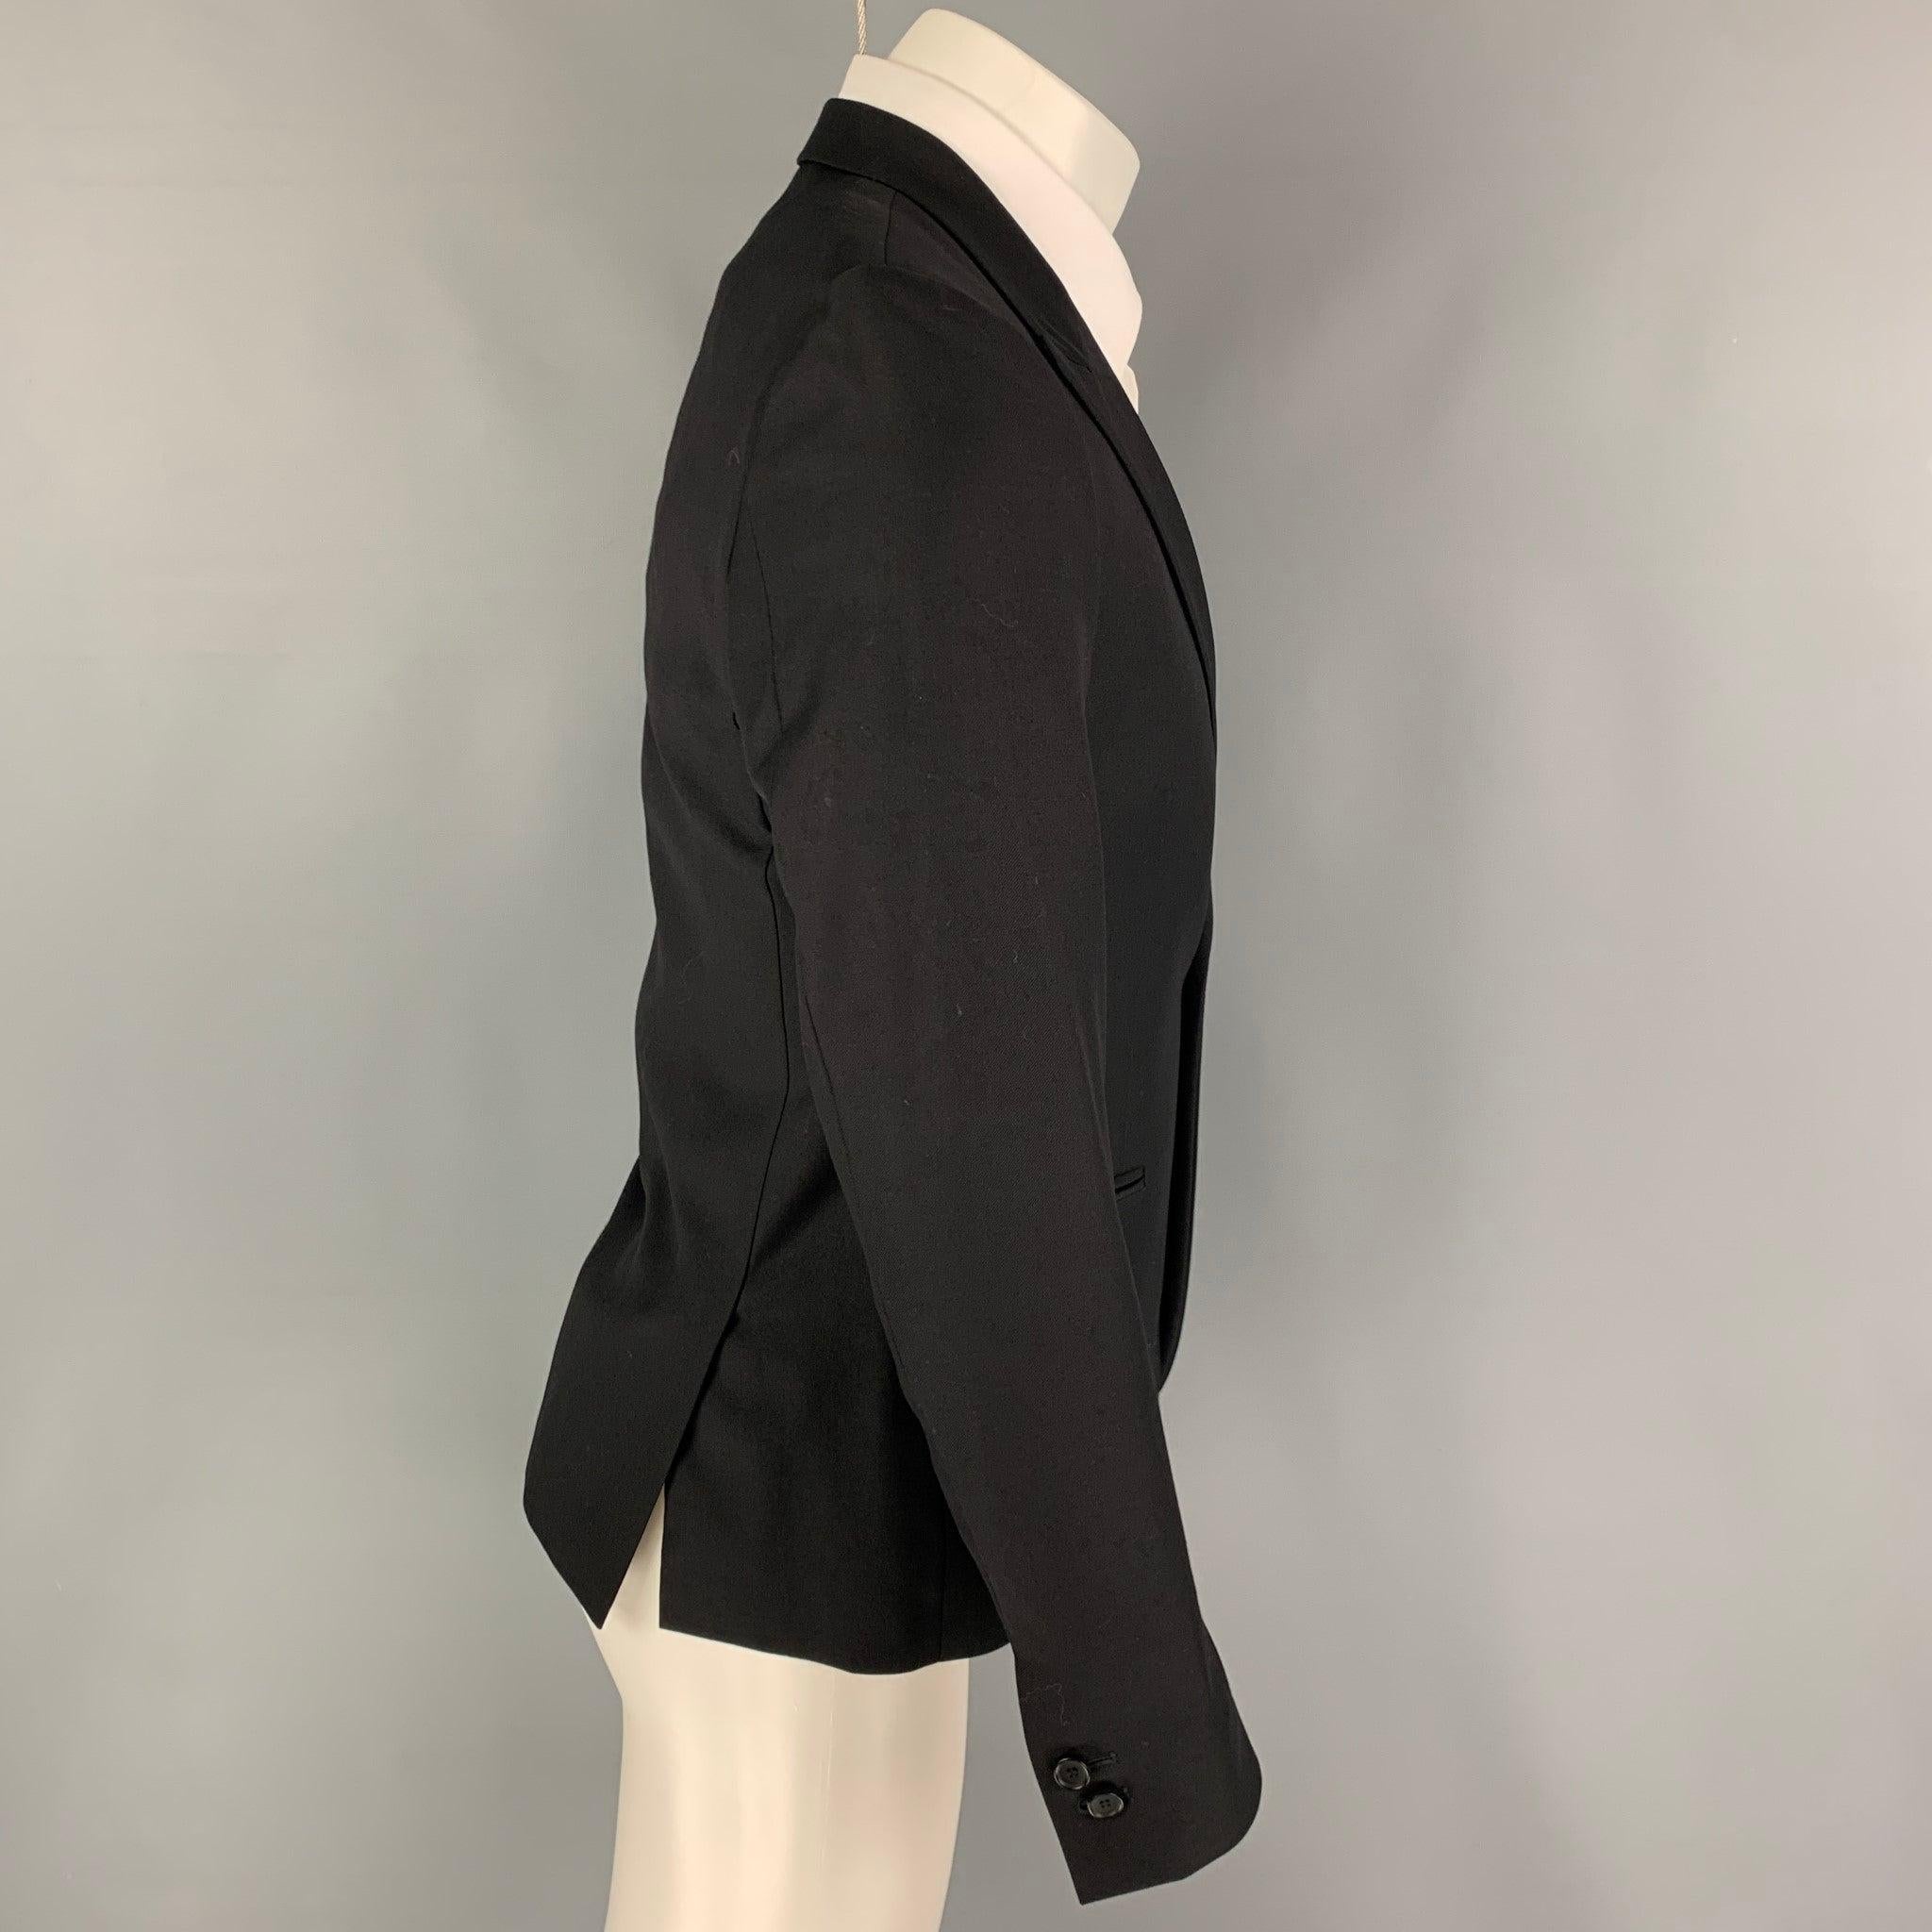 THE KOOPLES sport coat comes in a black wool with a full liner featuring a peak lapel, slit pockets, double back vent, and a single button closure.
Excellent
Pre-Owned Condition. 

Marked:   46 

Measurements: 
 
Shoulder: 16 inches Chest: 36 inches